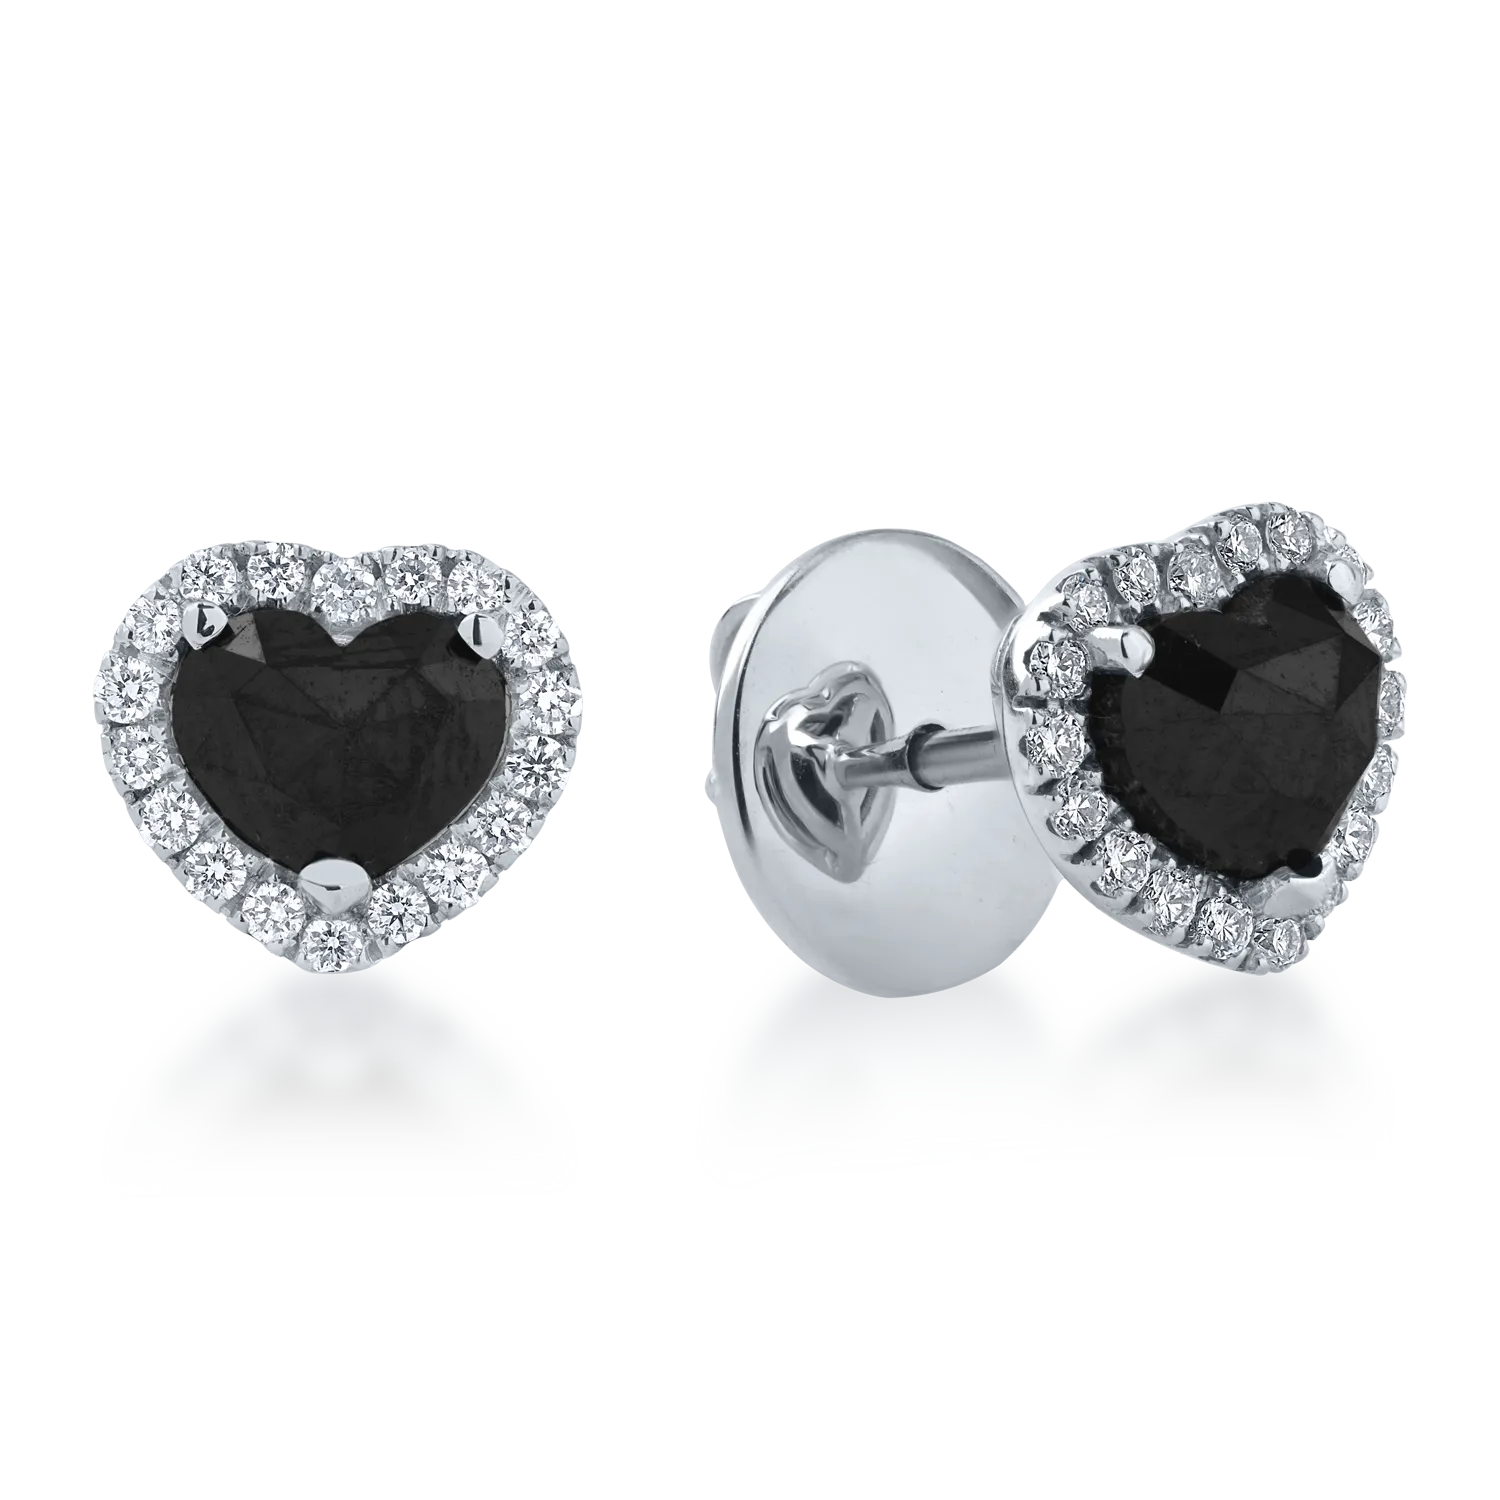 White gold heart earrings with 1.26ct black diamonds and 0.22ct clear diamonds